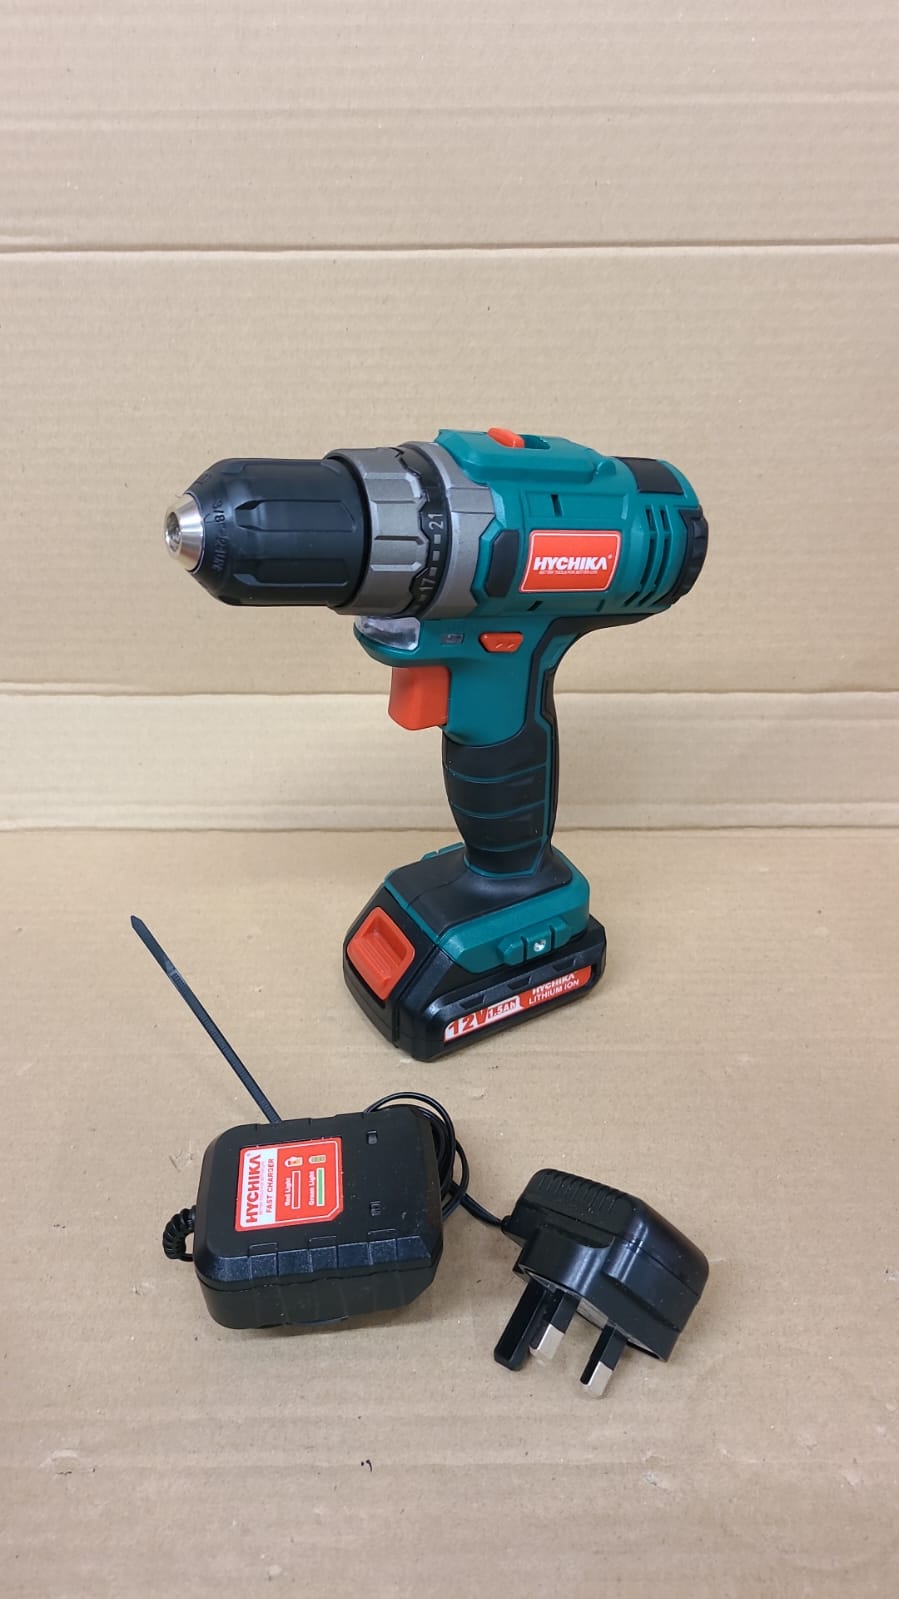 Cordless Drill 12V, HYCHIKA Electric Screwdriver-4746